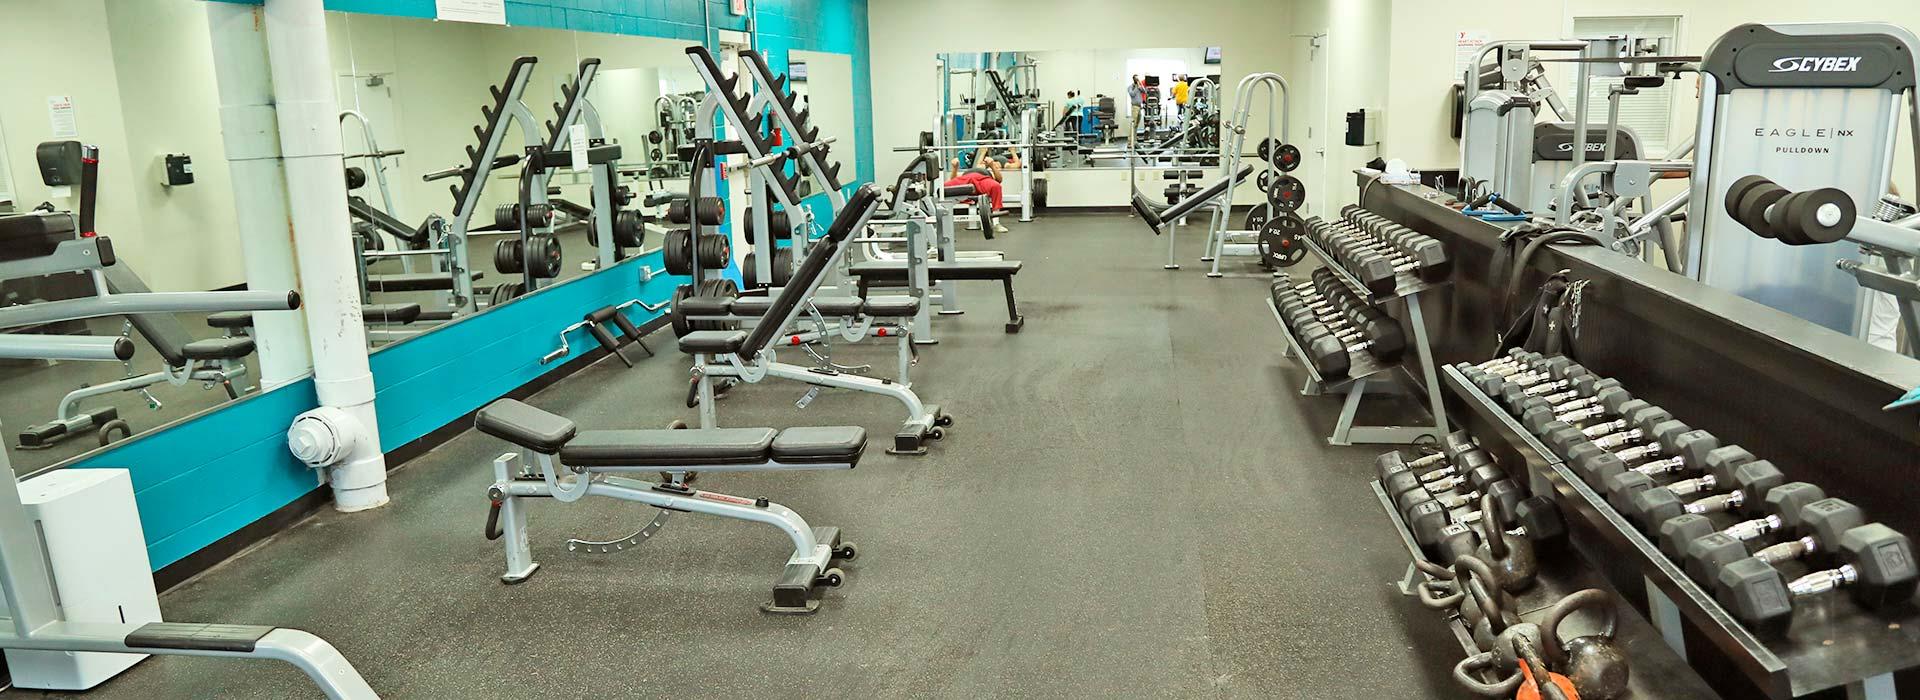 Eastern Shore Family YMCA weight room